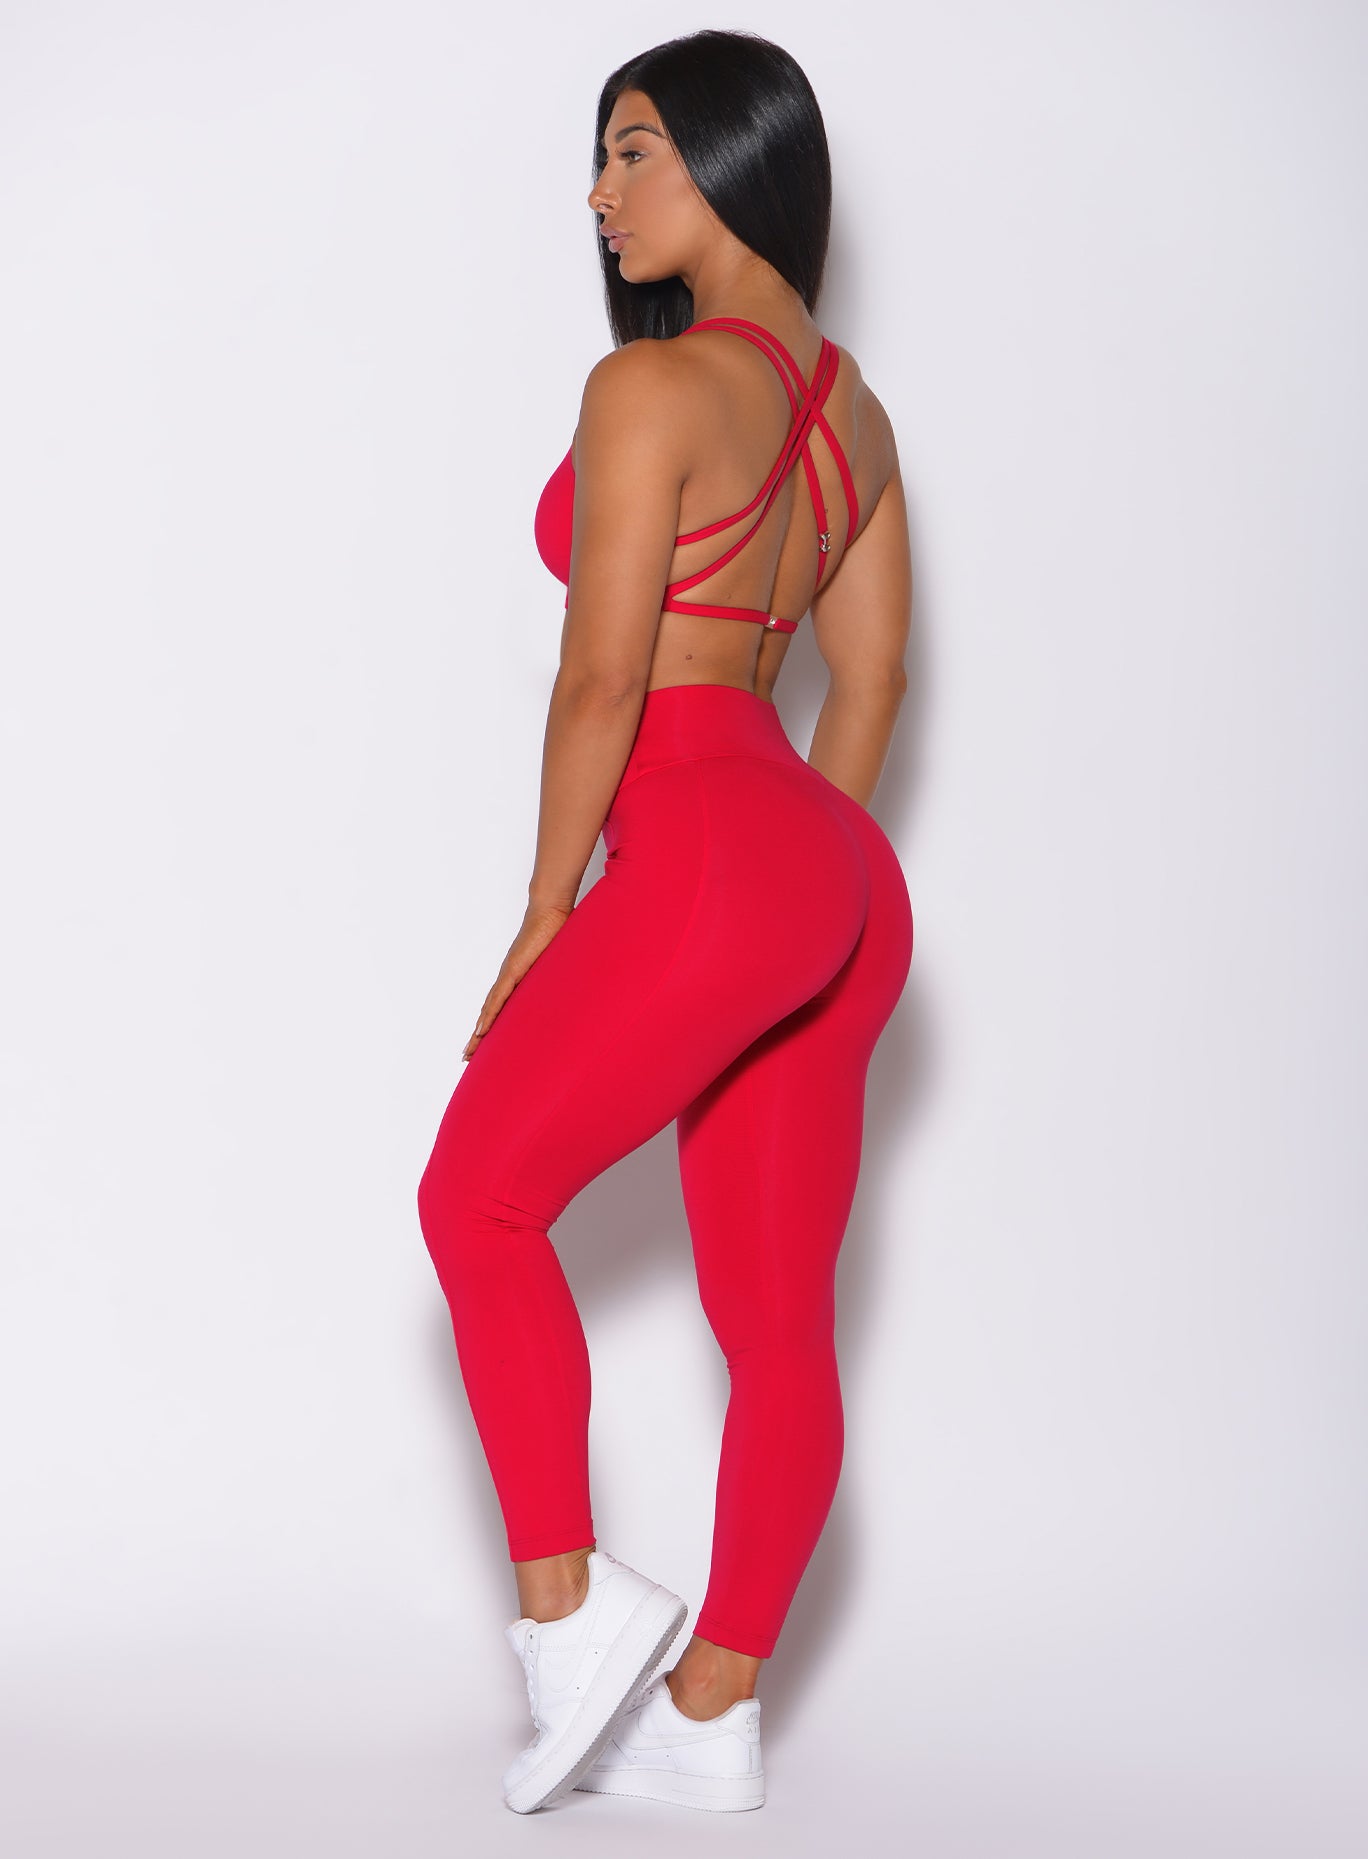 Left side profile view of a model in our red barbell leggings and a matching bra 